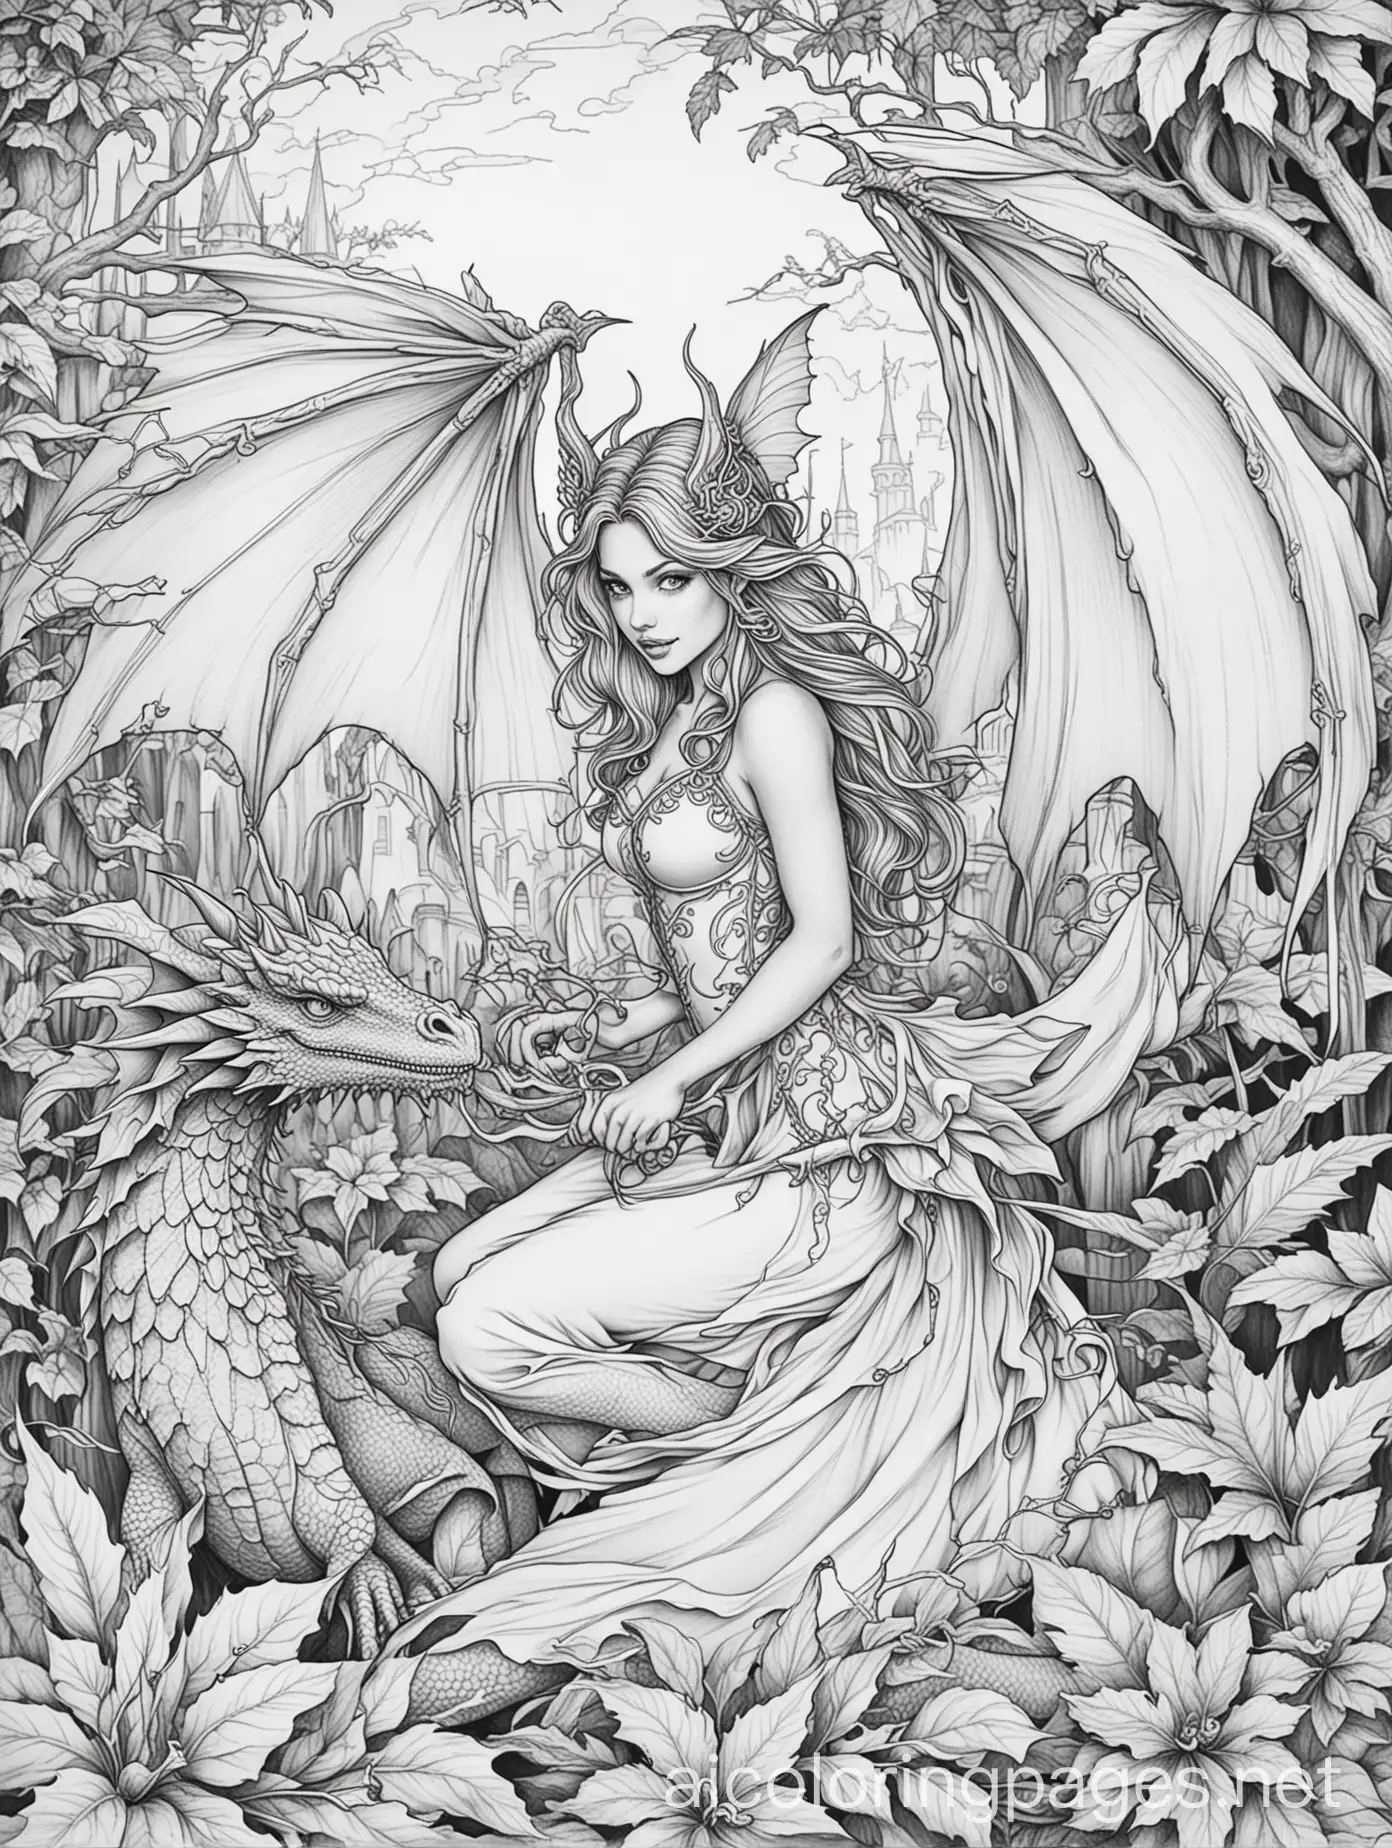 wicked fairy and dragon scene adult  coloring pages




, Coloring Page, black and white, line art, white background, Simplicity, Ample White Space. The background of the coloring page is plain white to make it easy for young children to color within the lines. The outlines of all the subjects are easy to distinguish, making it simple for kids to color without too much difficulty